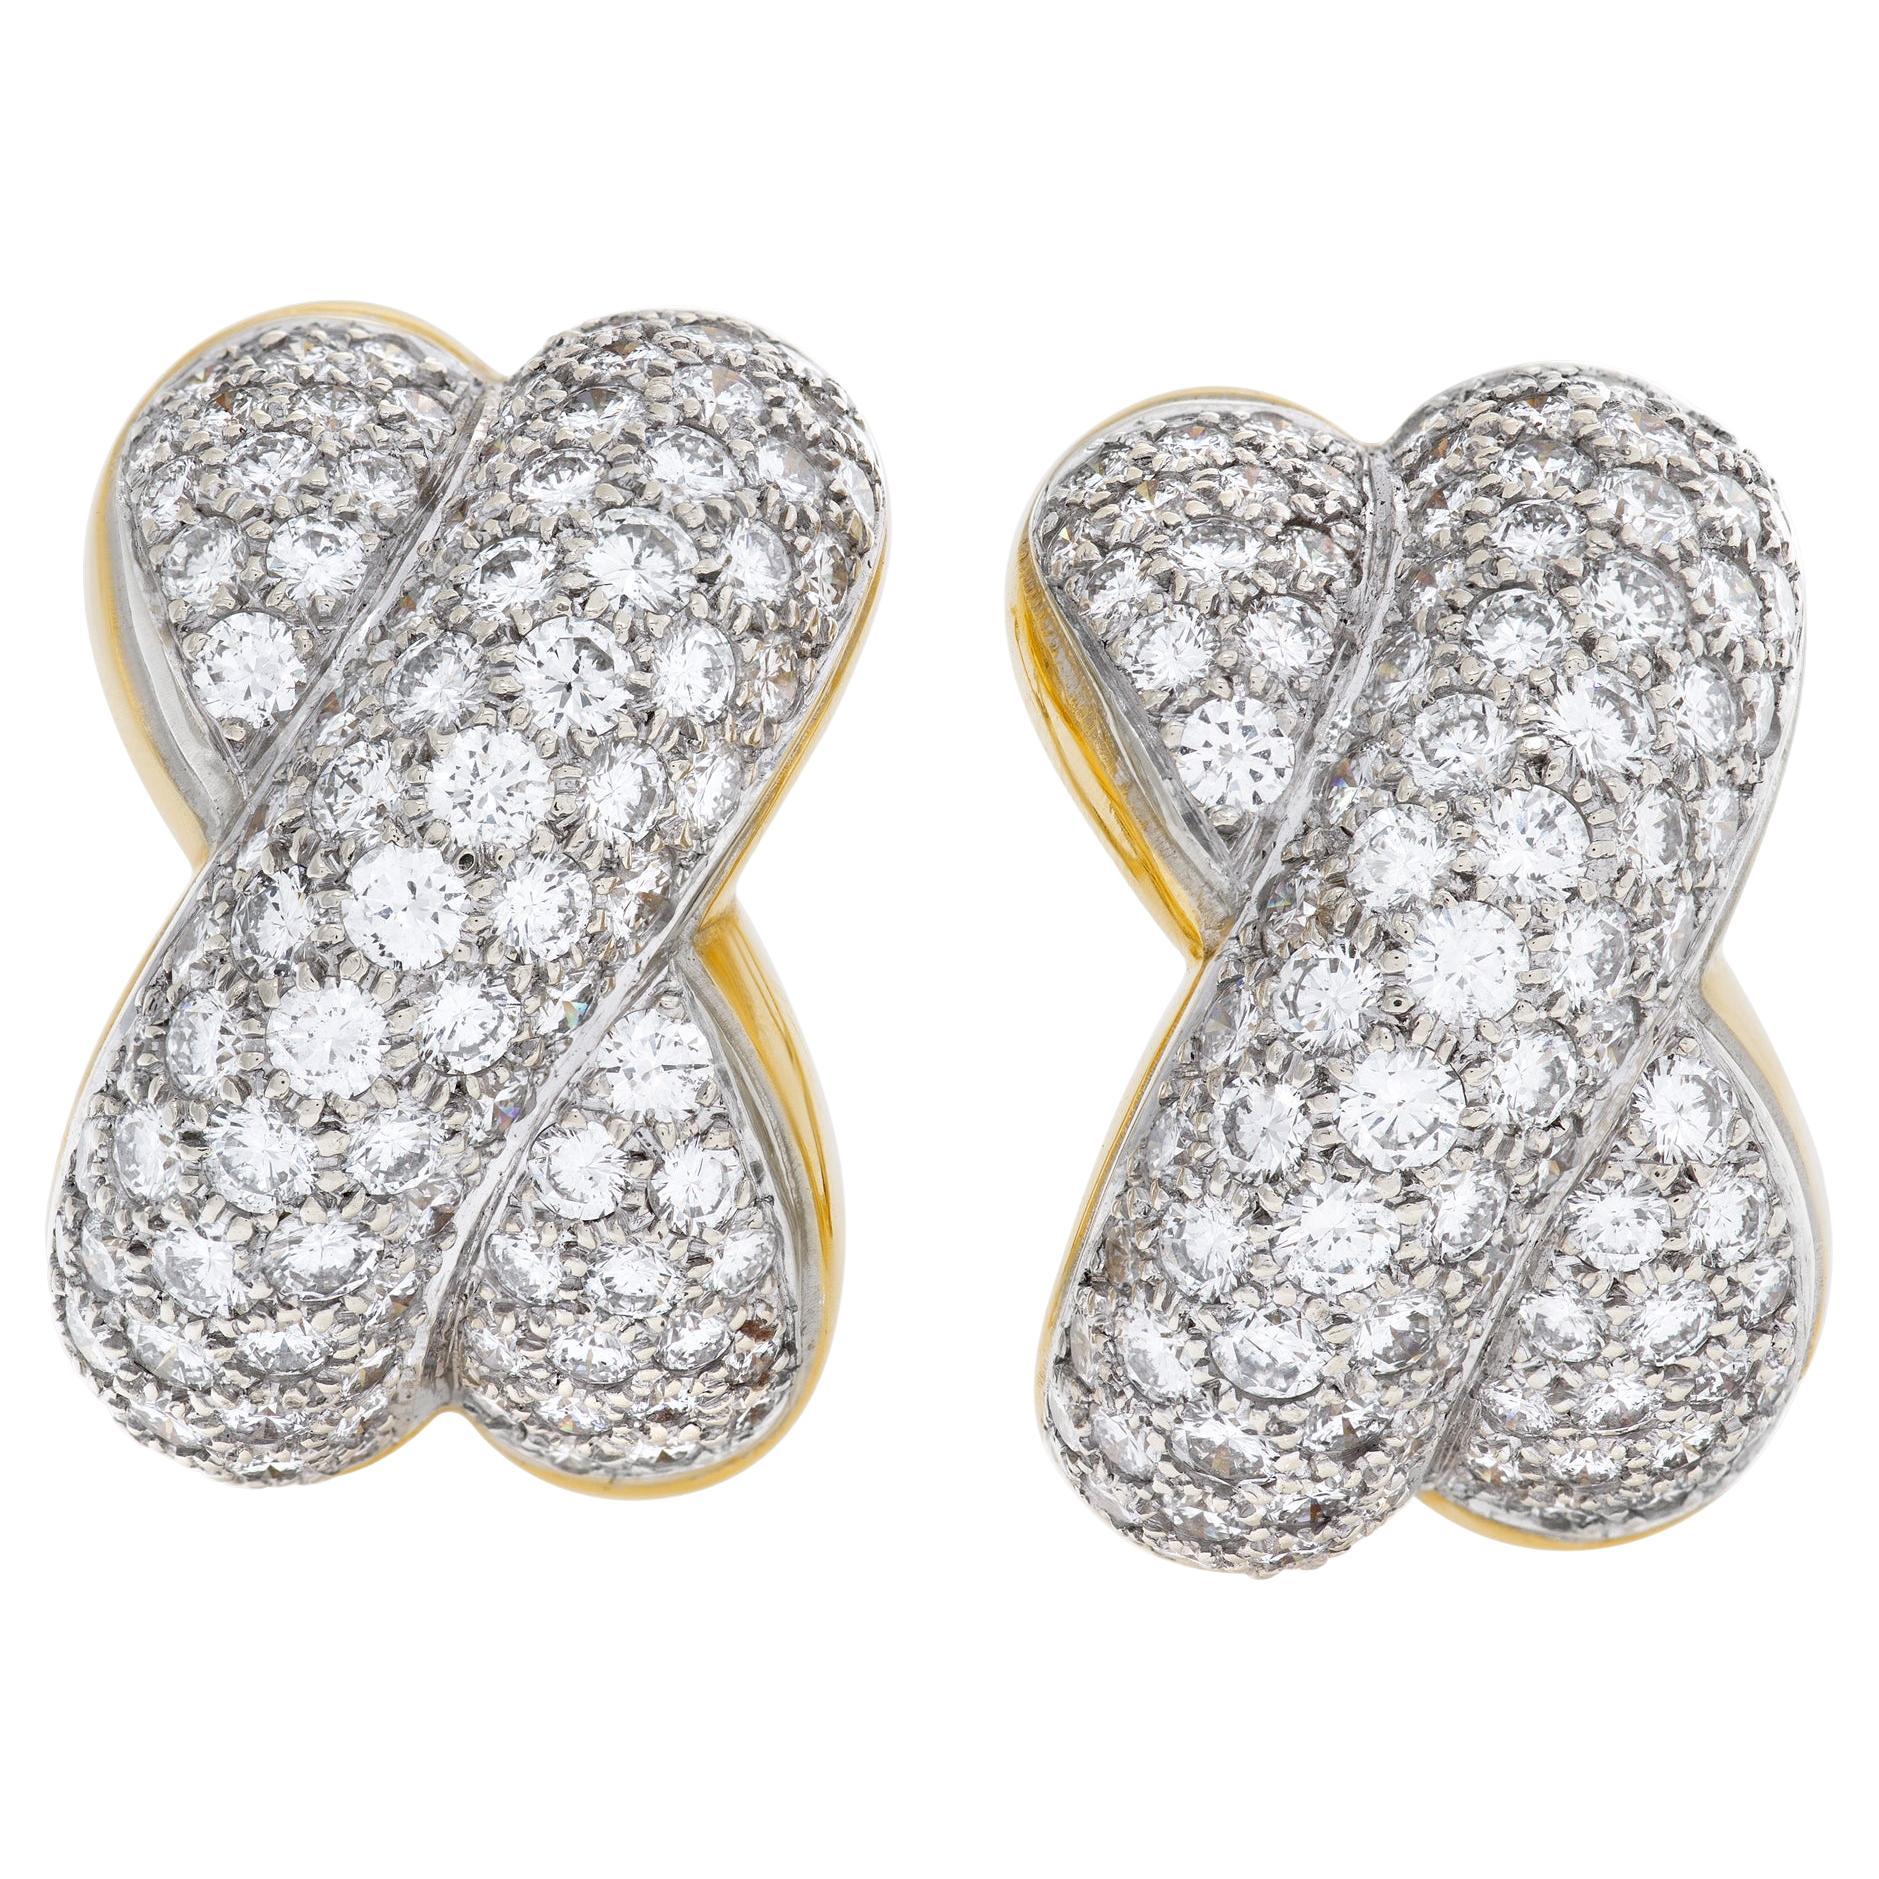 Diamond "X" earrings in 18k white and yellow gold. 8cts (G-H color, VS clarity)